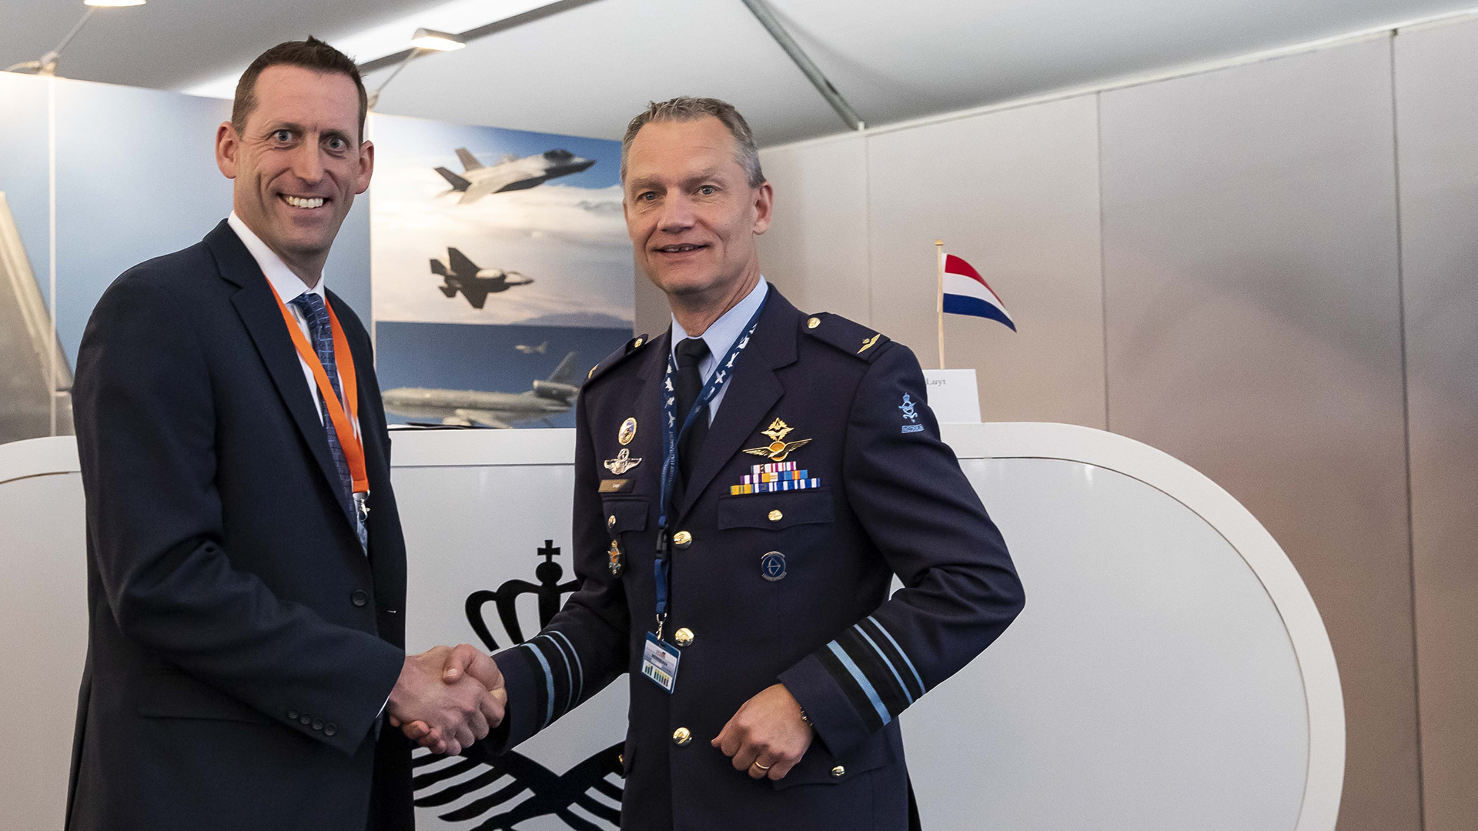 Collins Aerospace will manage the RNLAF’s F-35 and CH-47F fleets